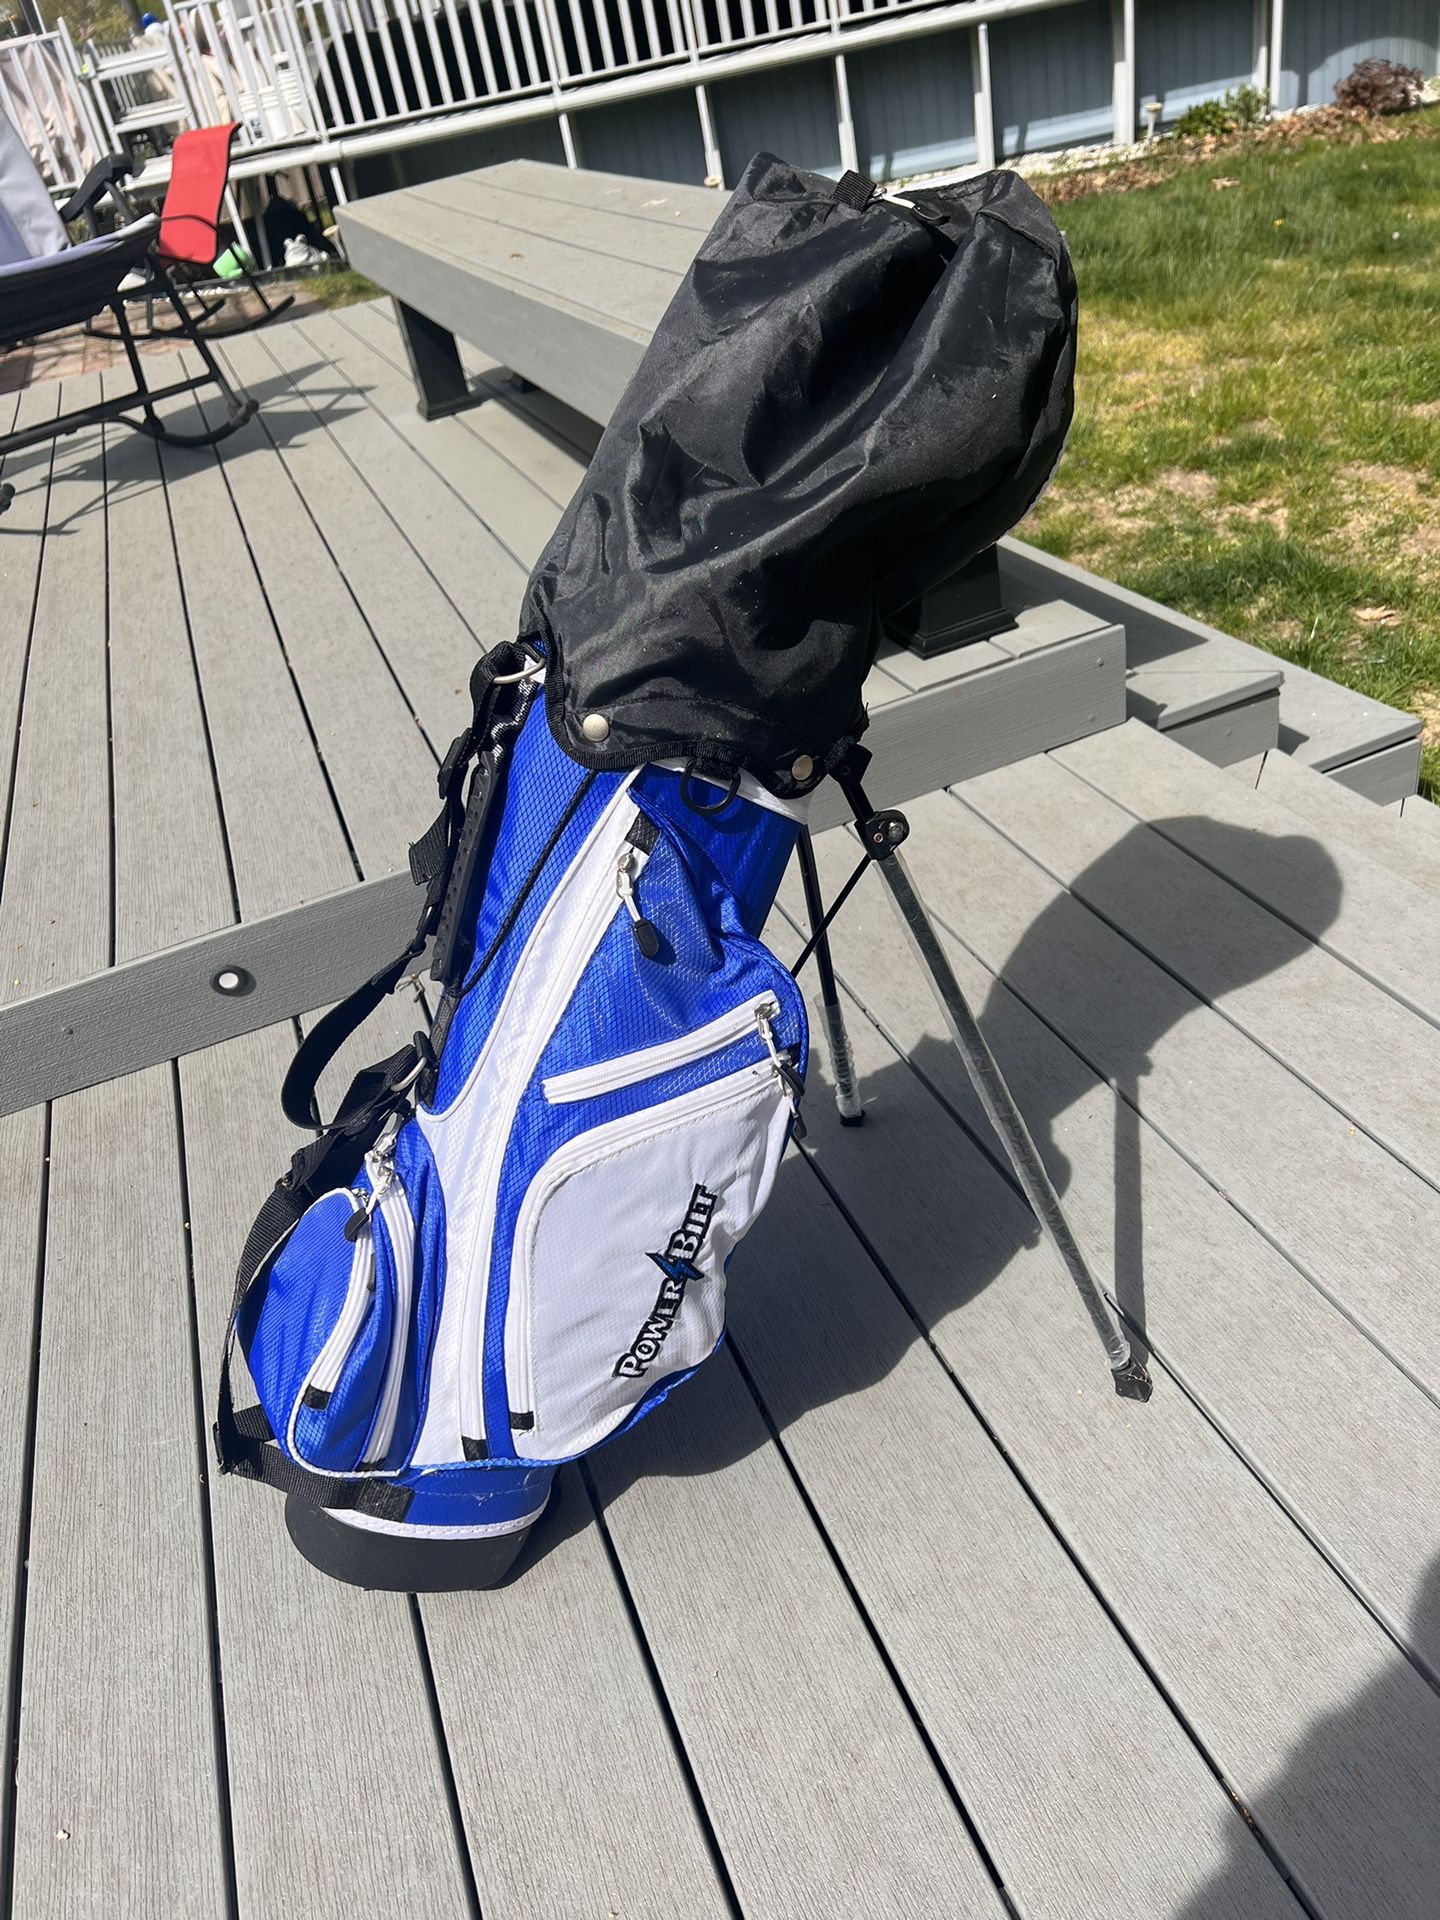 Golf Clubs And Bag For Kids